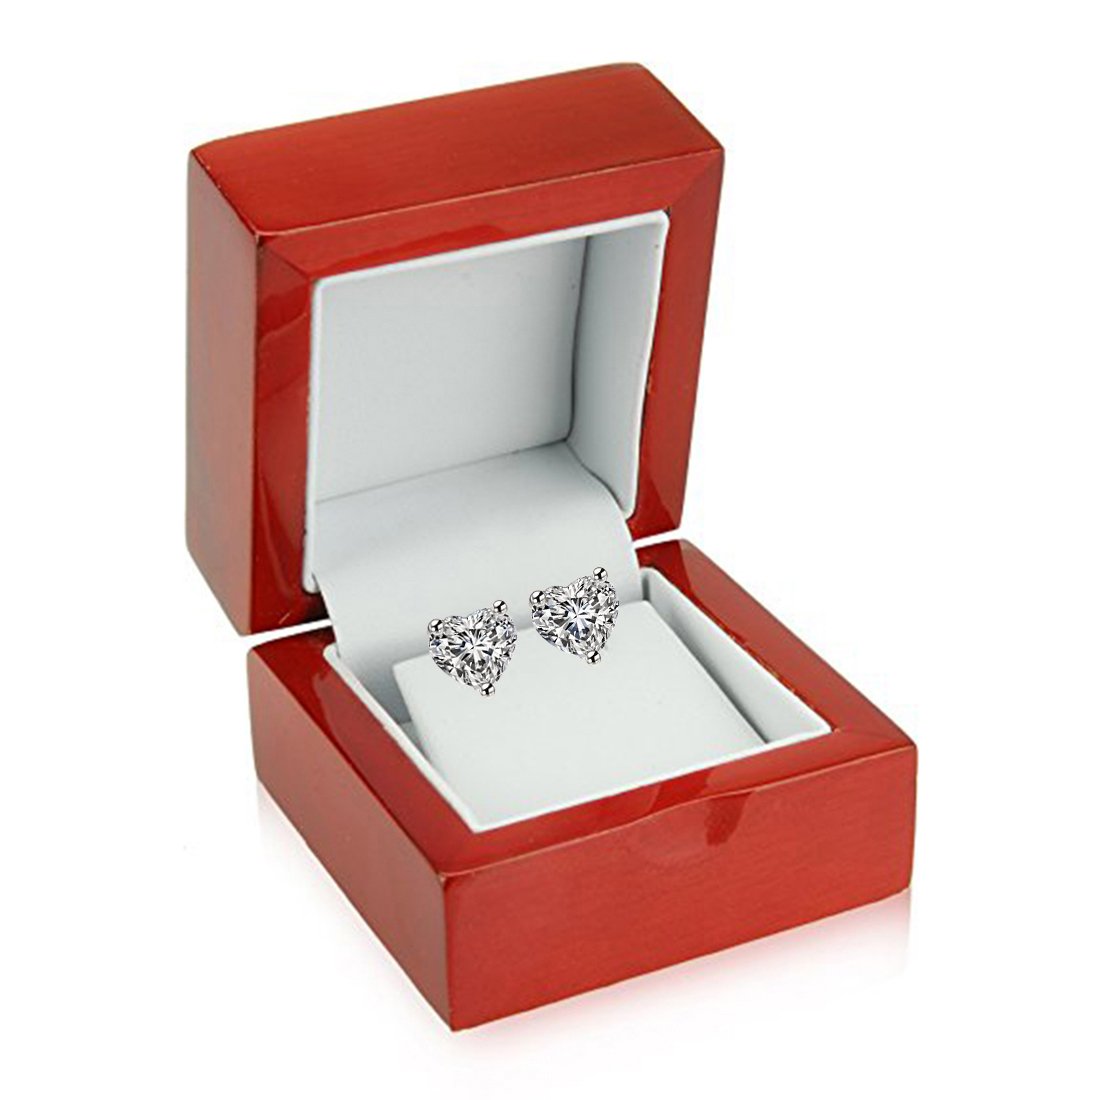 PLATINUM 950 HEART. Choose From 0.25 CTW To 10.00 CTW